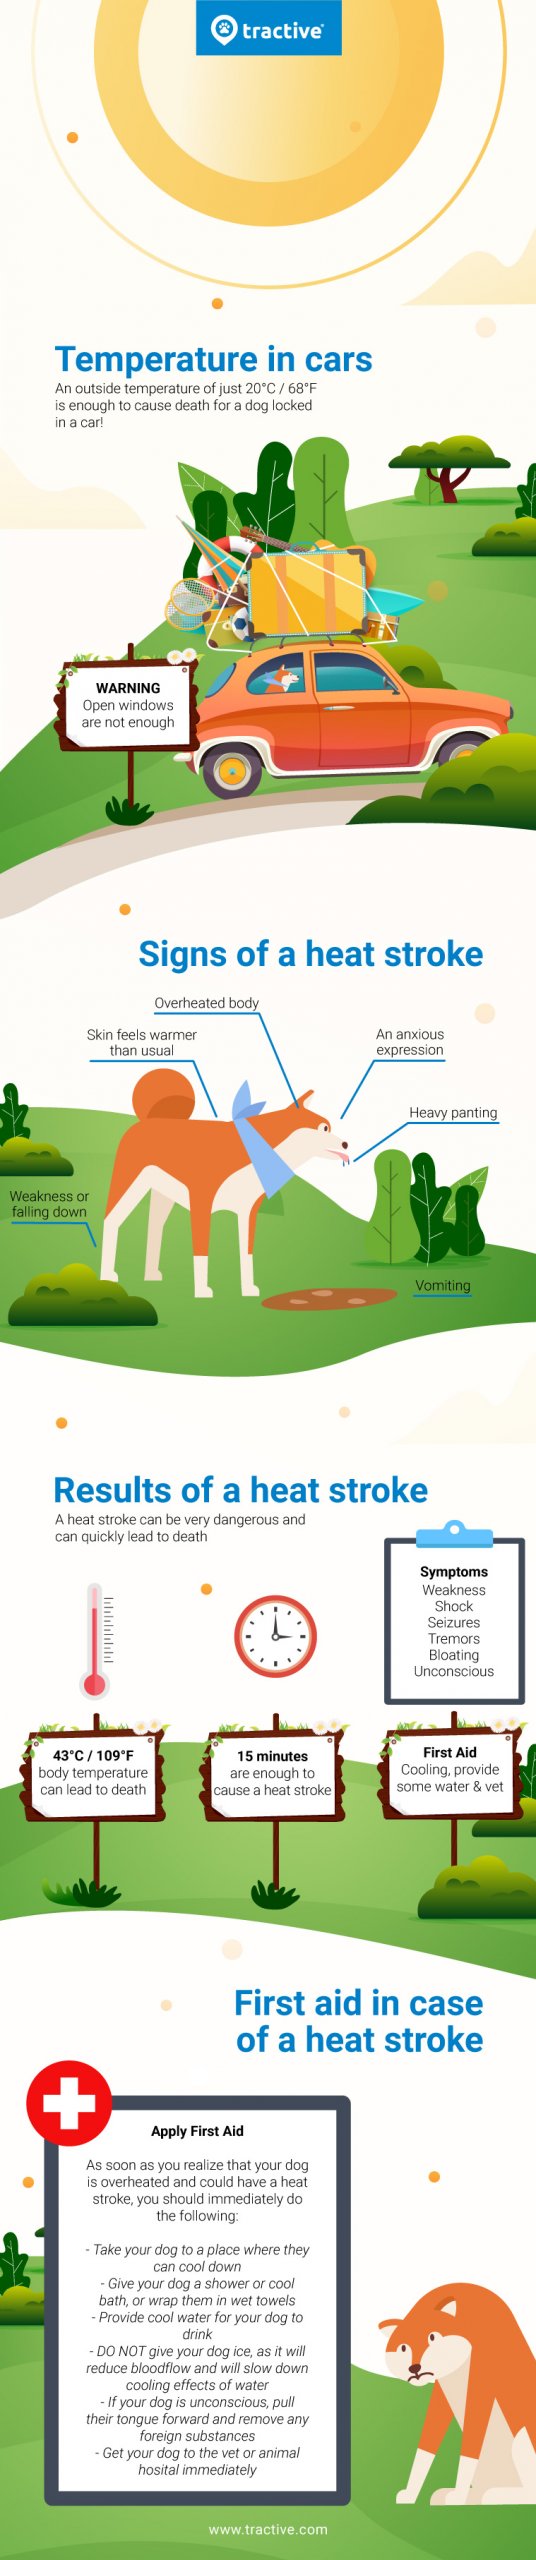 heat stroke in dogs infographic never leave your dog in a hot car